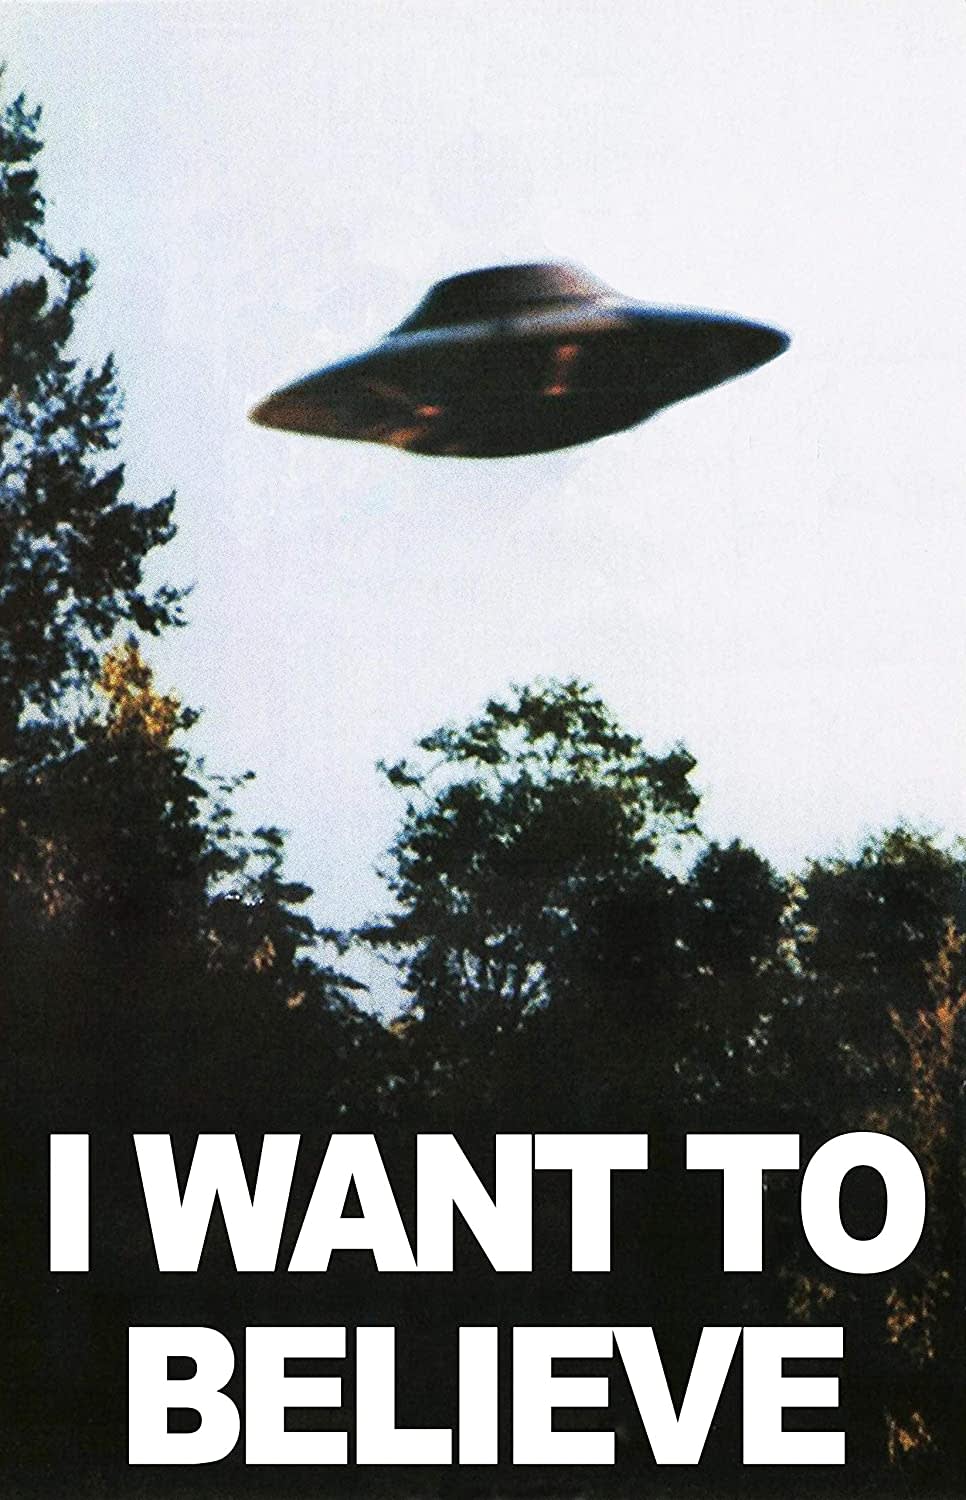 Amazon.co.jp: X FILES"I Want to Believe" Mulders Office Tv Show Poster  24x36 : Home & Kitchen